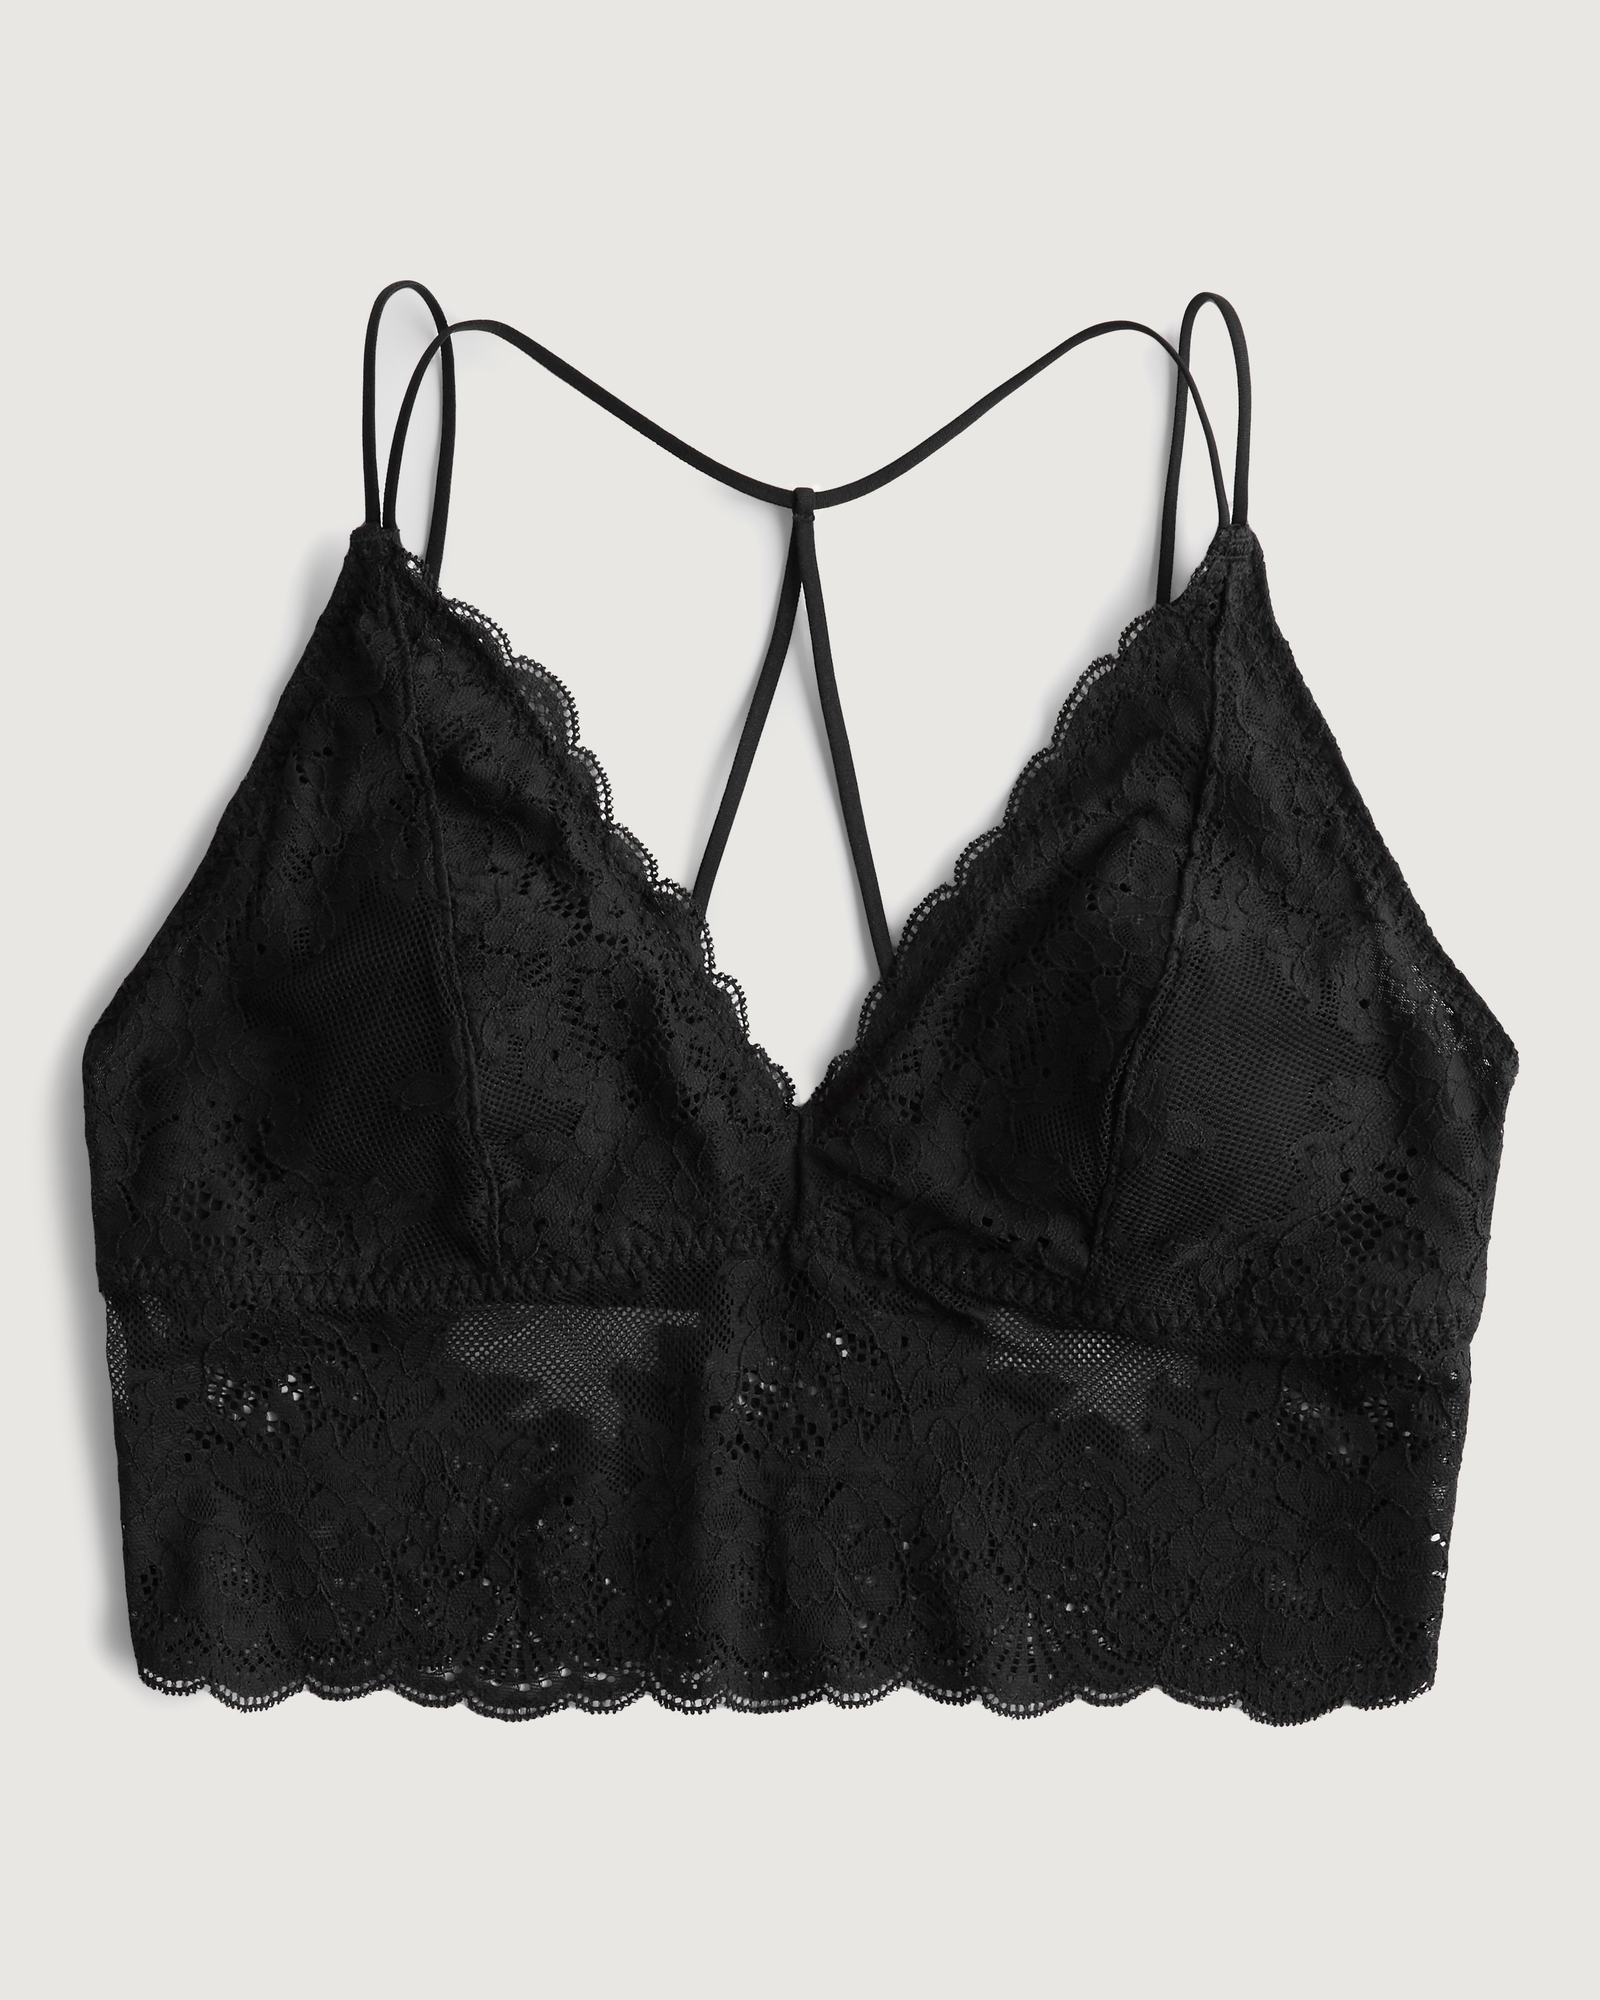 Gilly Hicks core lace halter bralet in black